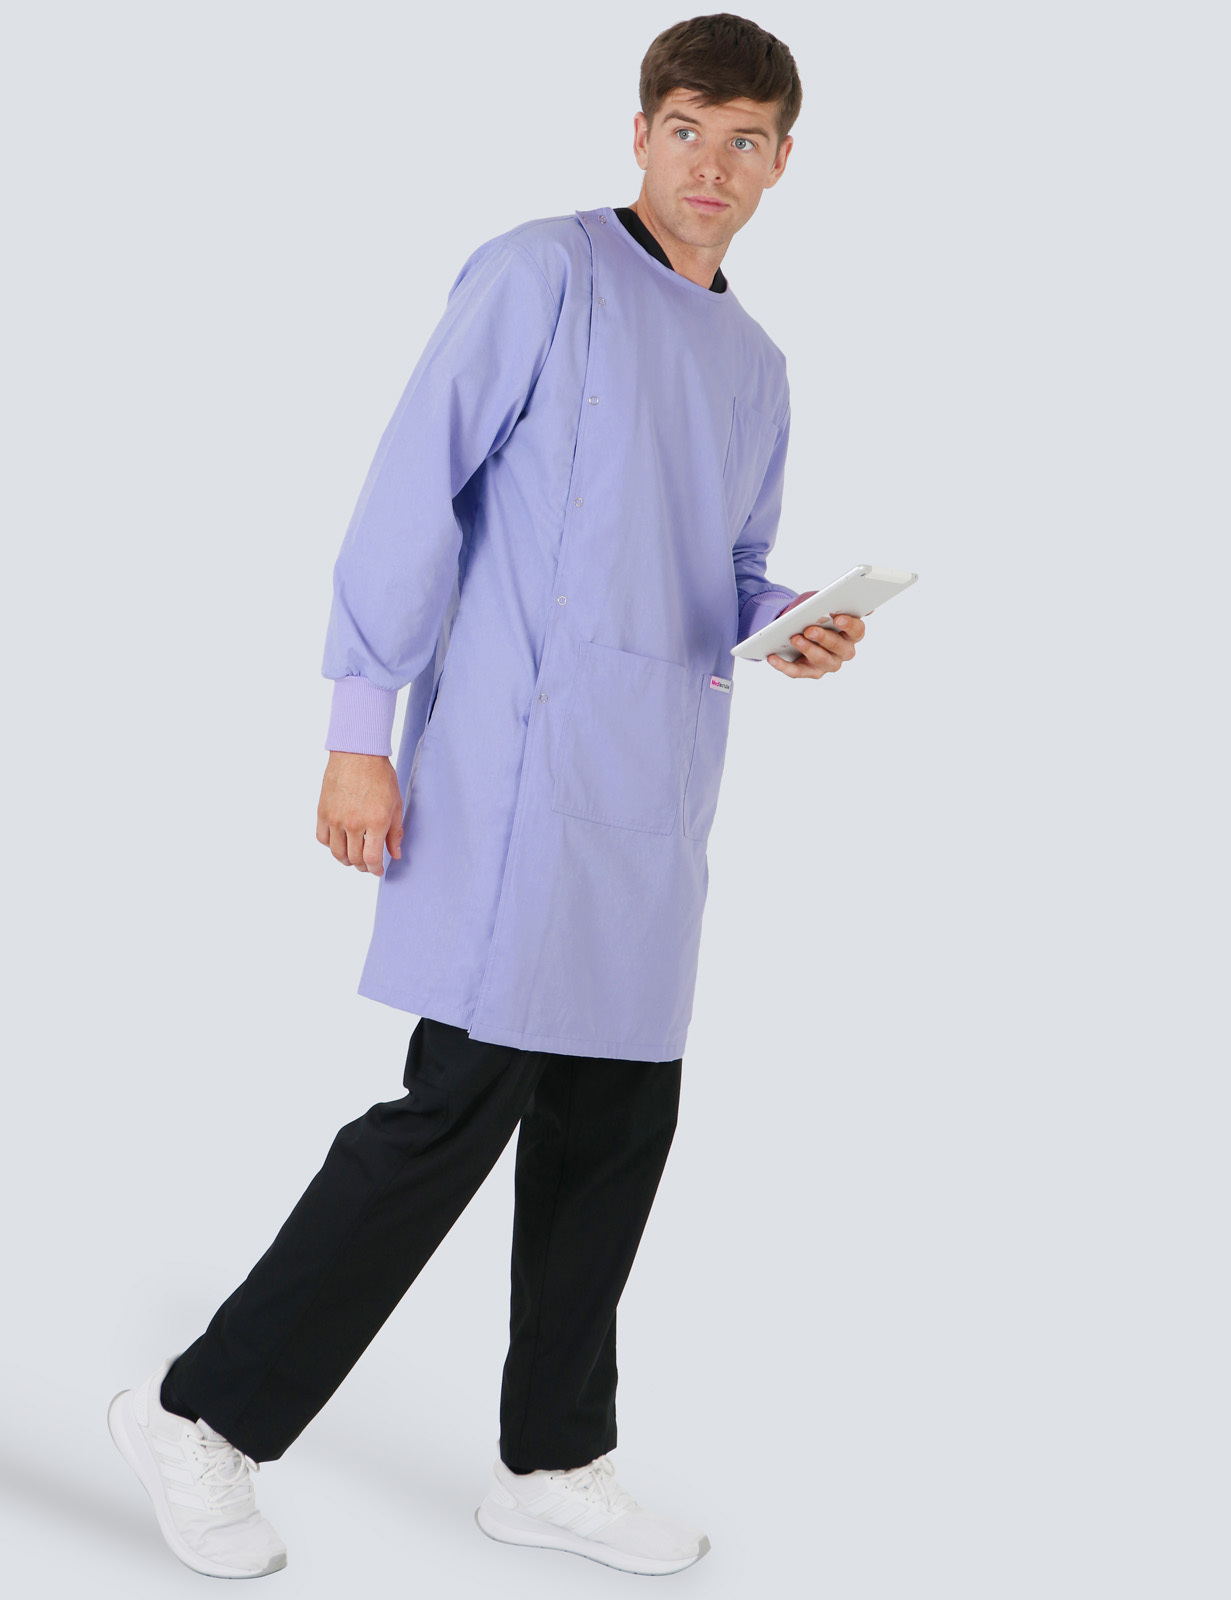 Side Opening Lab Coat - Lilac - 4X Large - 0